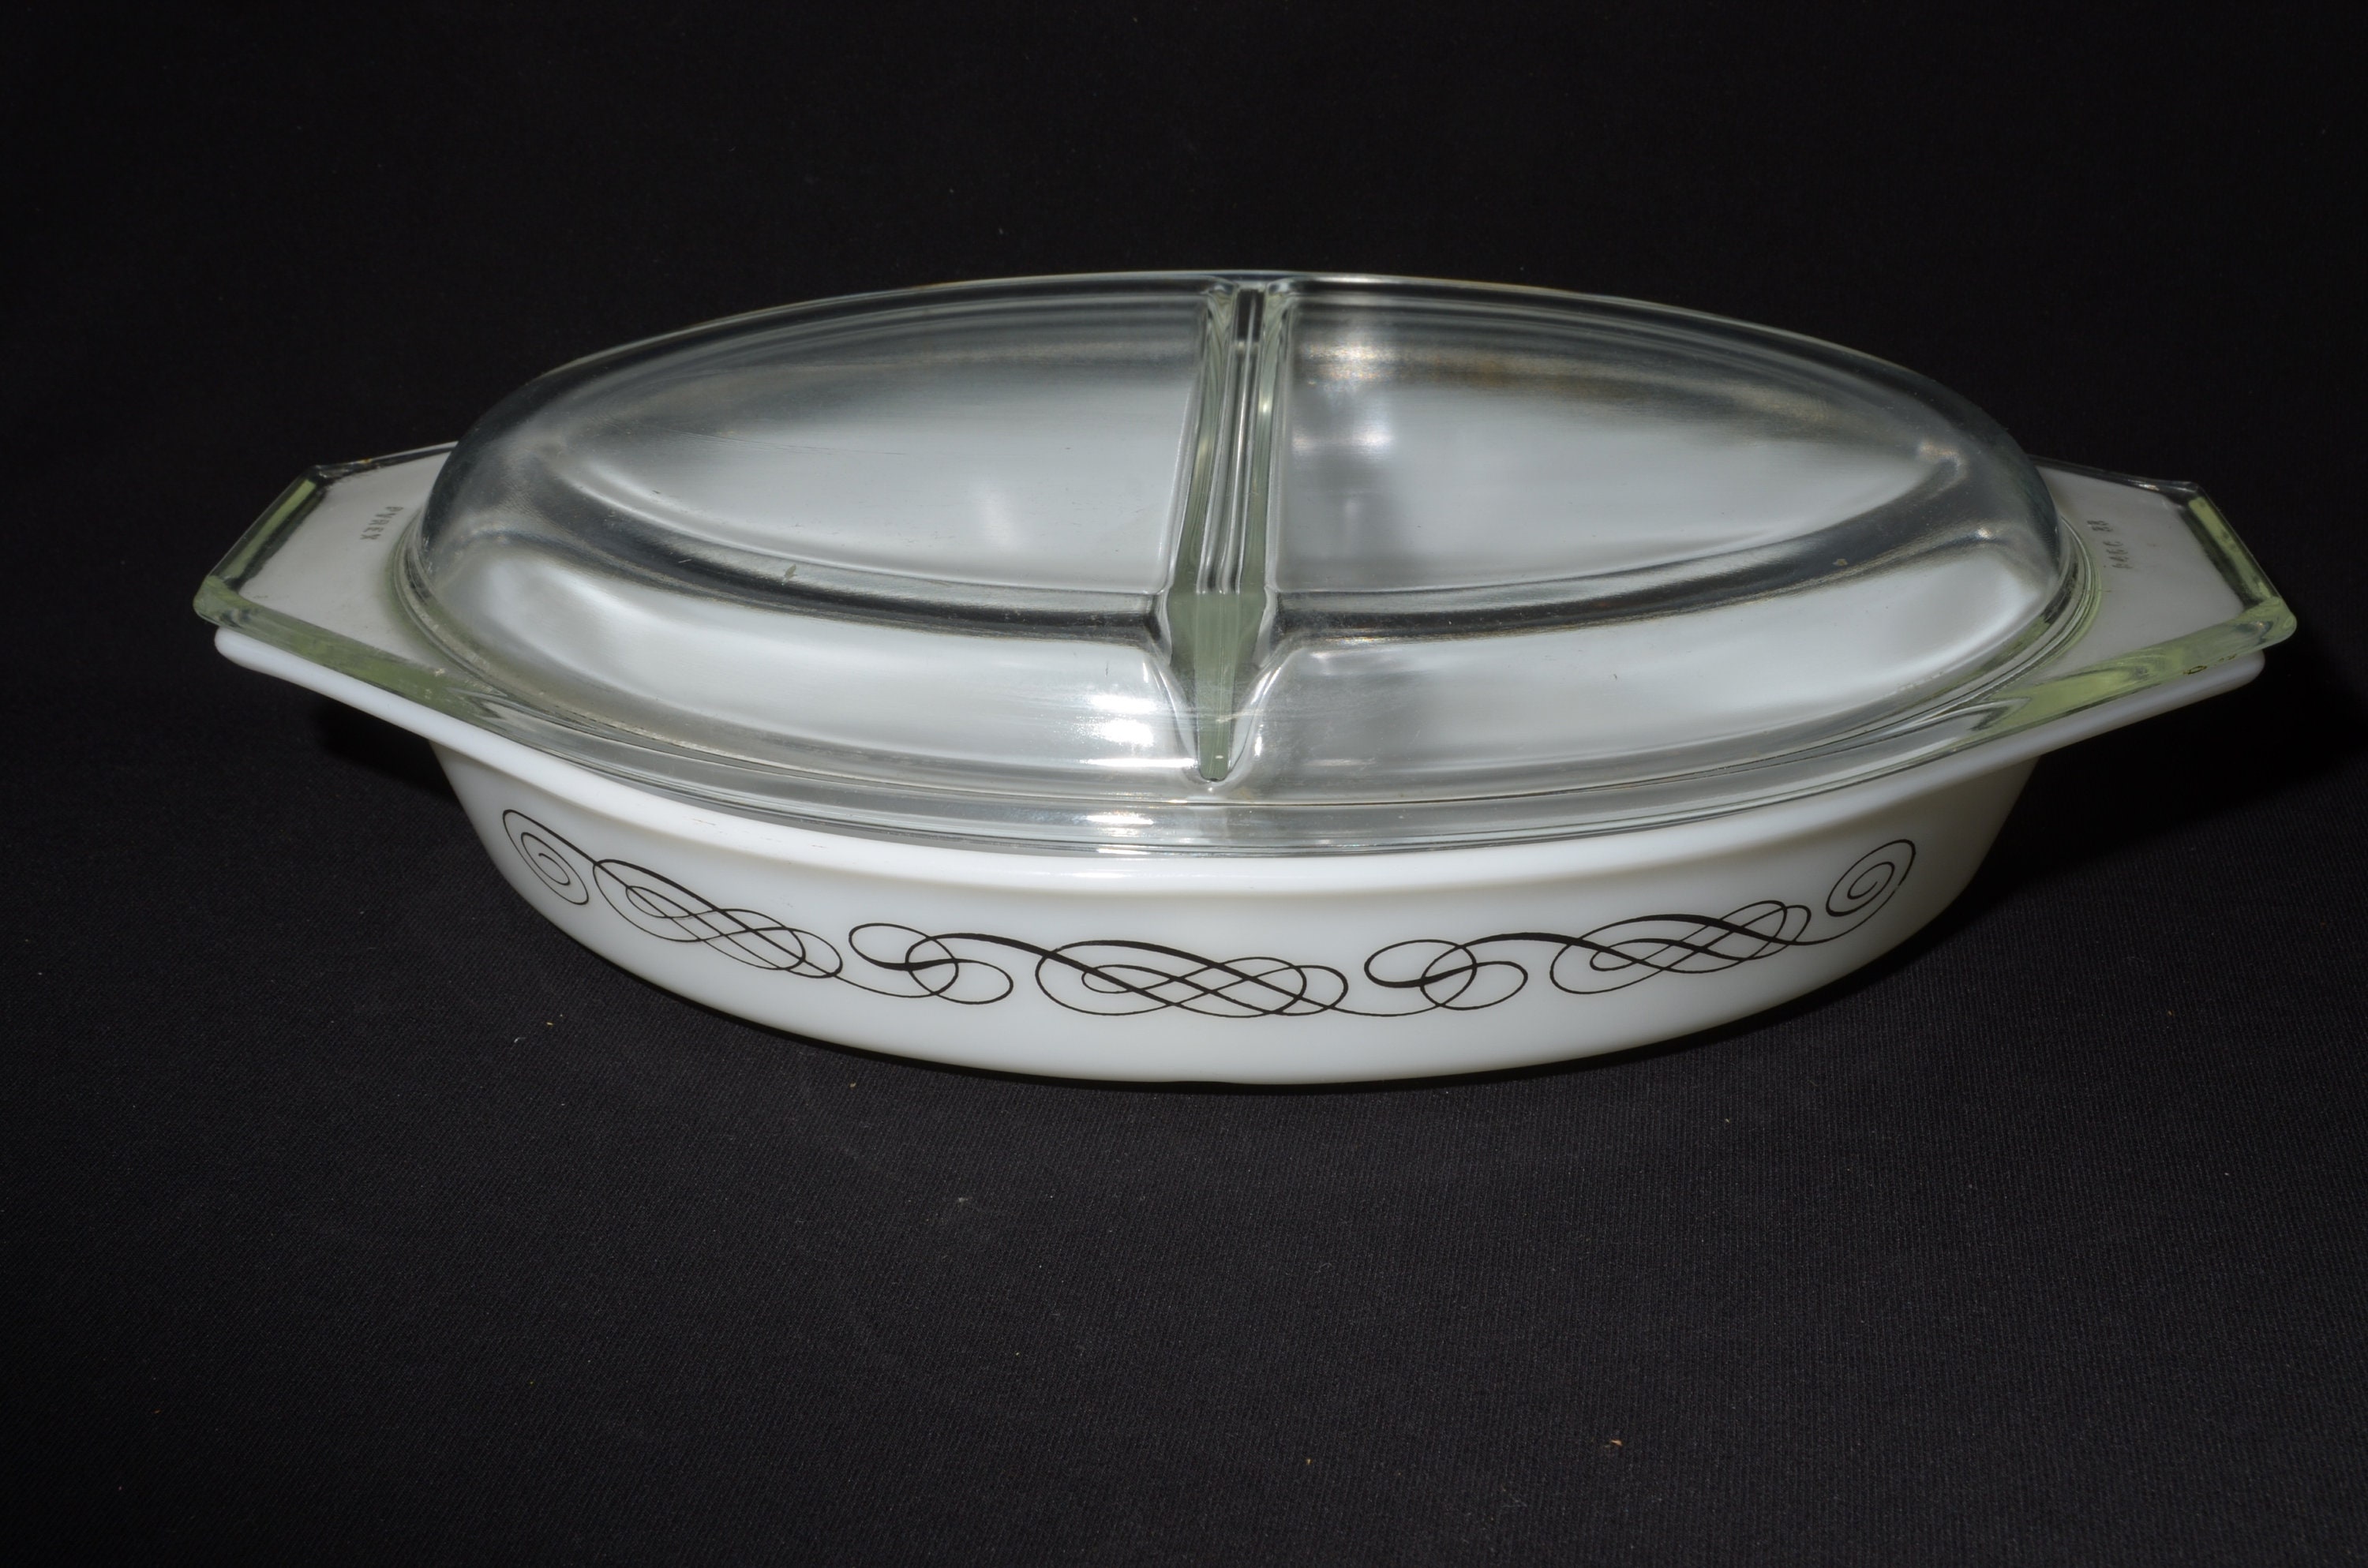 Fabulous Black Scroll Divided Casserole Vintage Baking Dish by